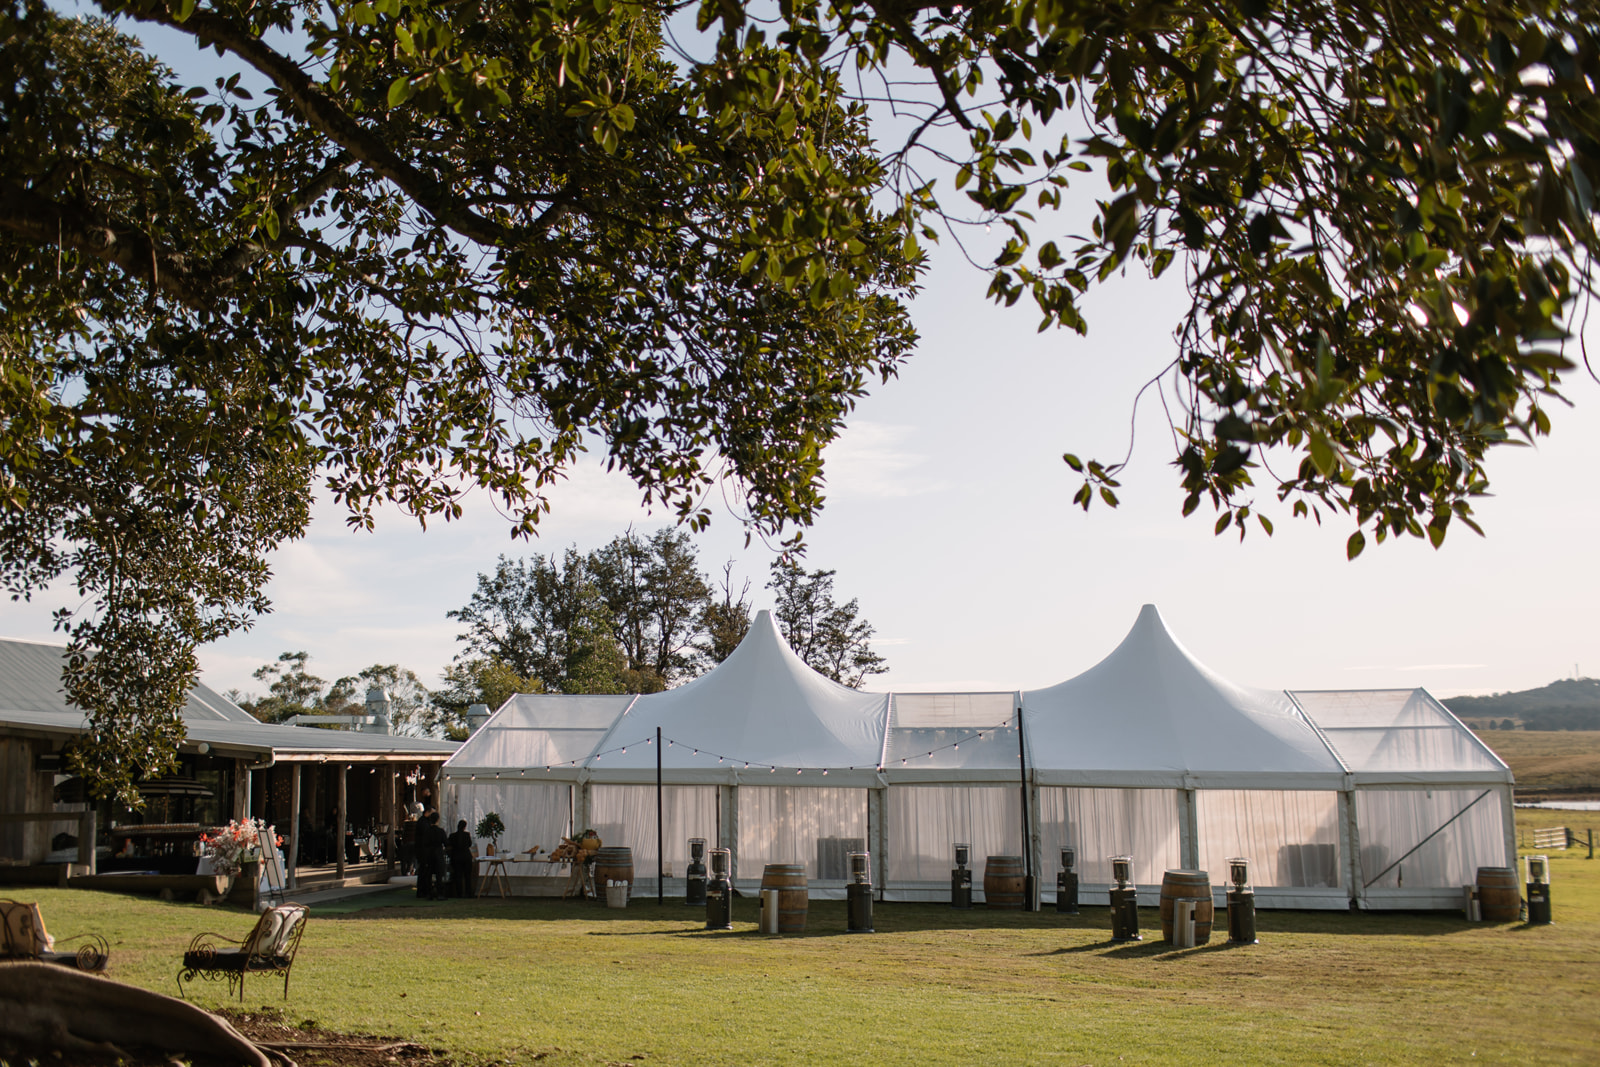 Clear Hocker Peaked Marquee With Festoon Lights for Outdoor Wedding Reception In Day Time